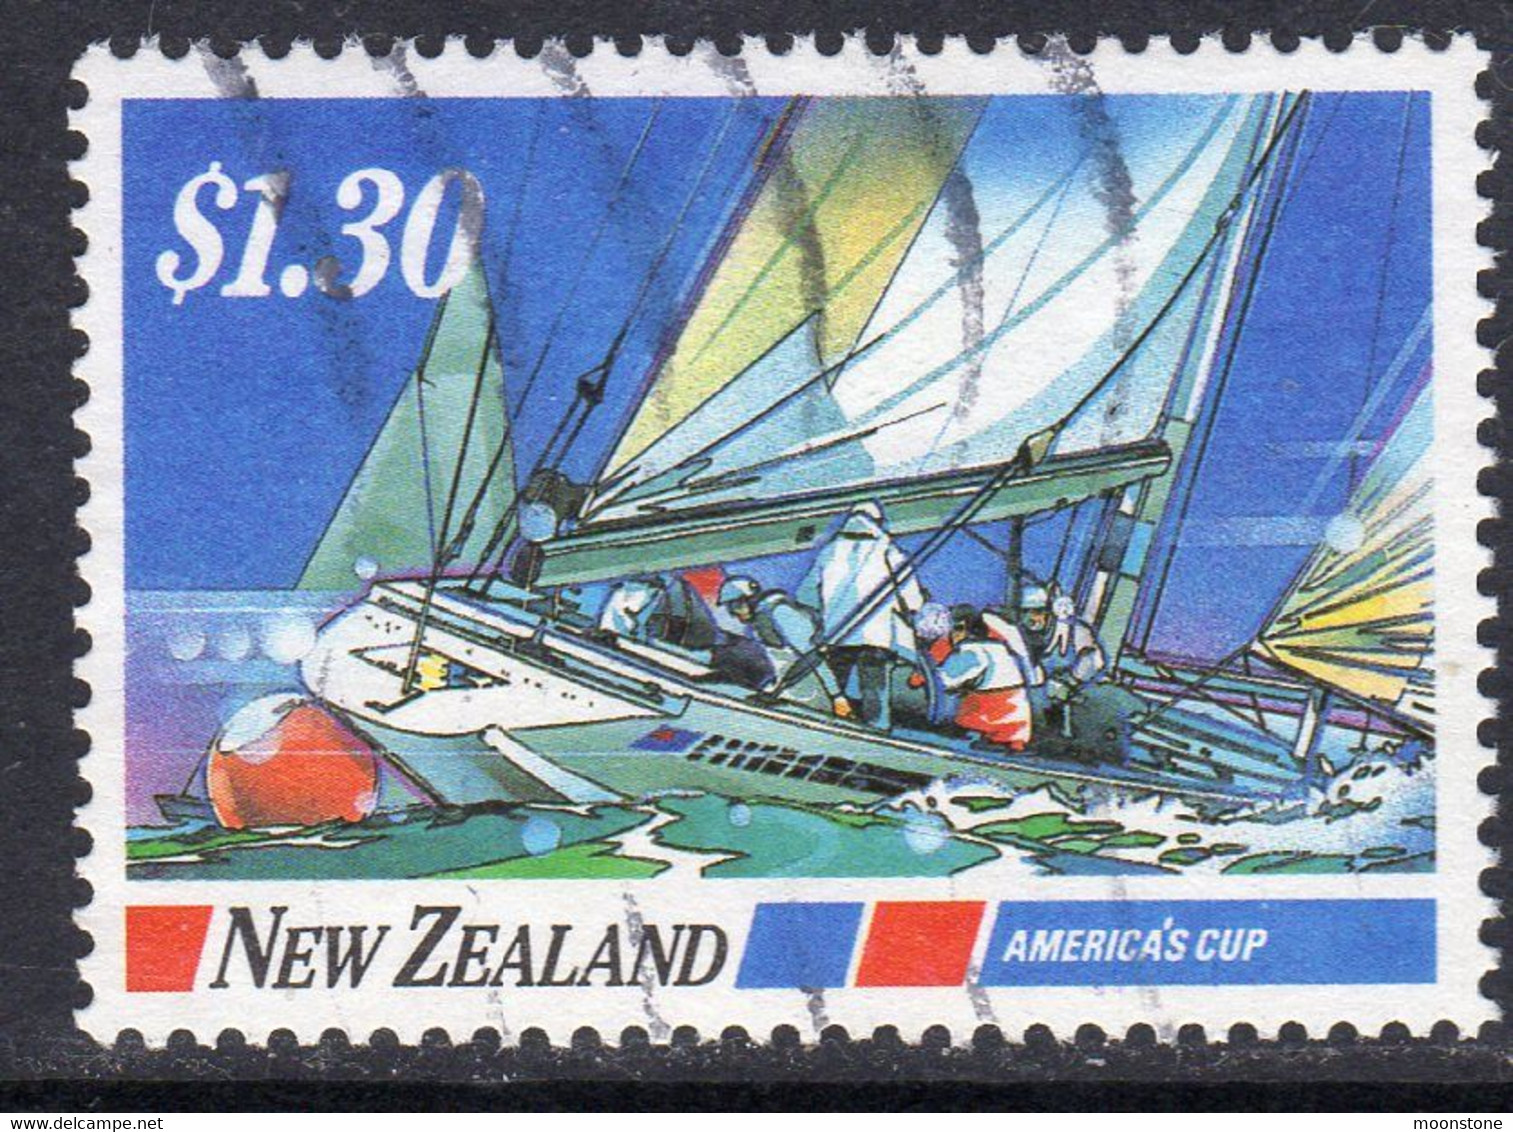 New Zealand 1987 Yachting $1.80 Value, Used, SG 1420 - Gebraucht